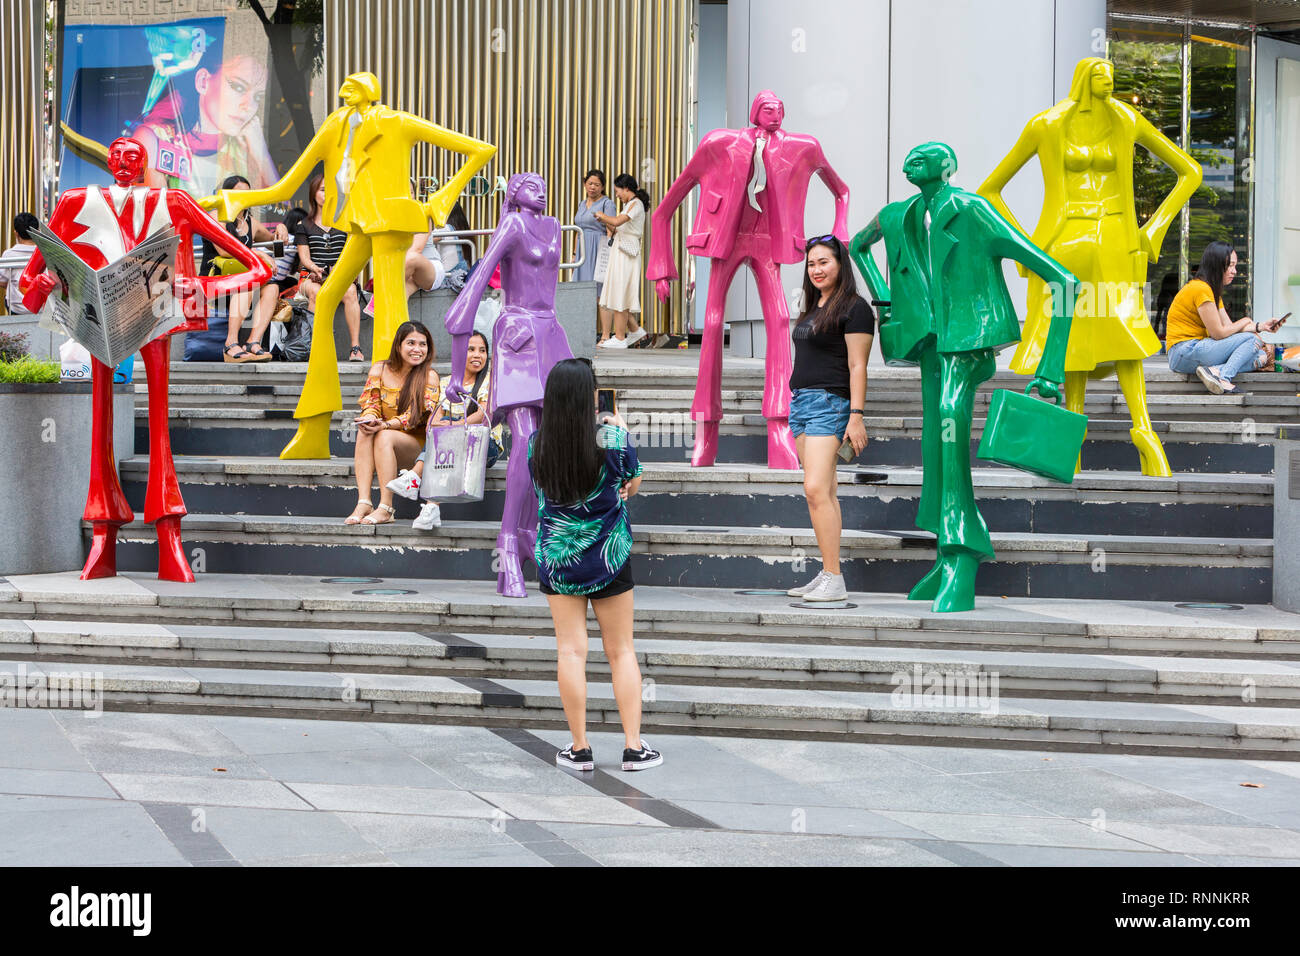 Shoppers Making Photos by Modern Fashion Sculptures outside ION Mall, Singapore, Orchard Road Street Scene.  Urban People by Kurt Lorenz Metzler. Stock Photo